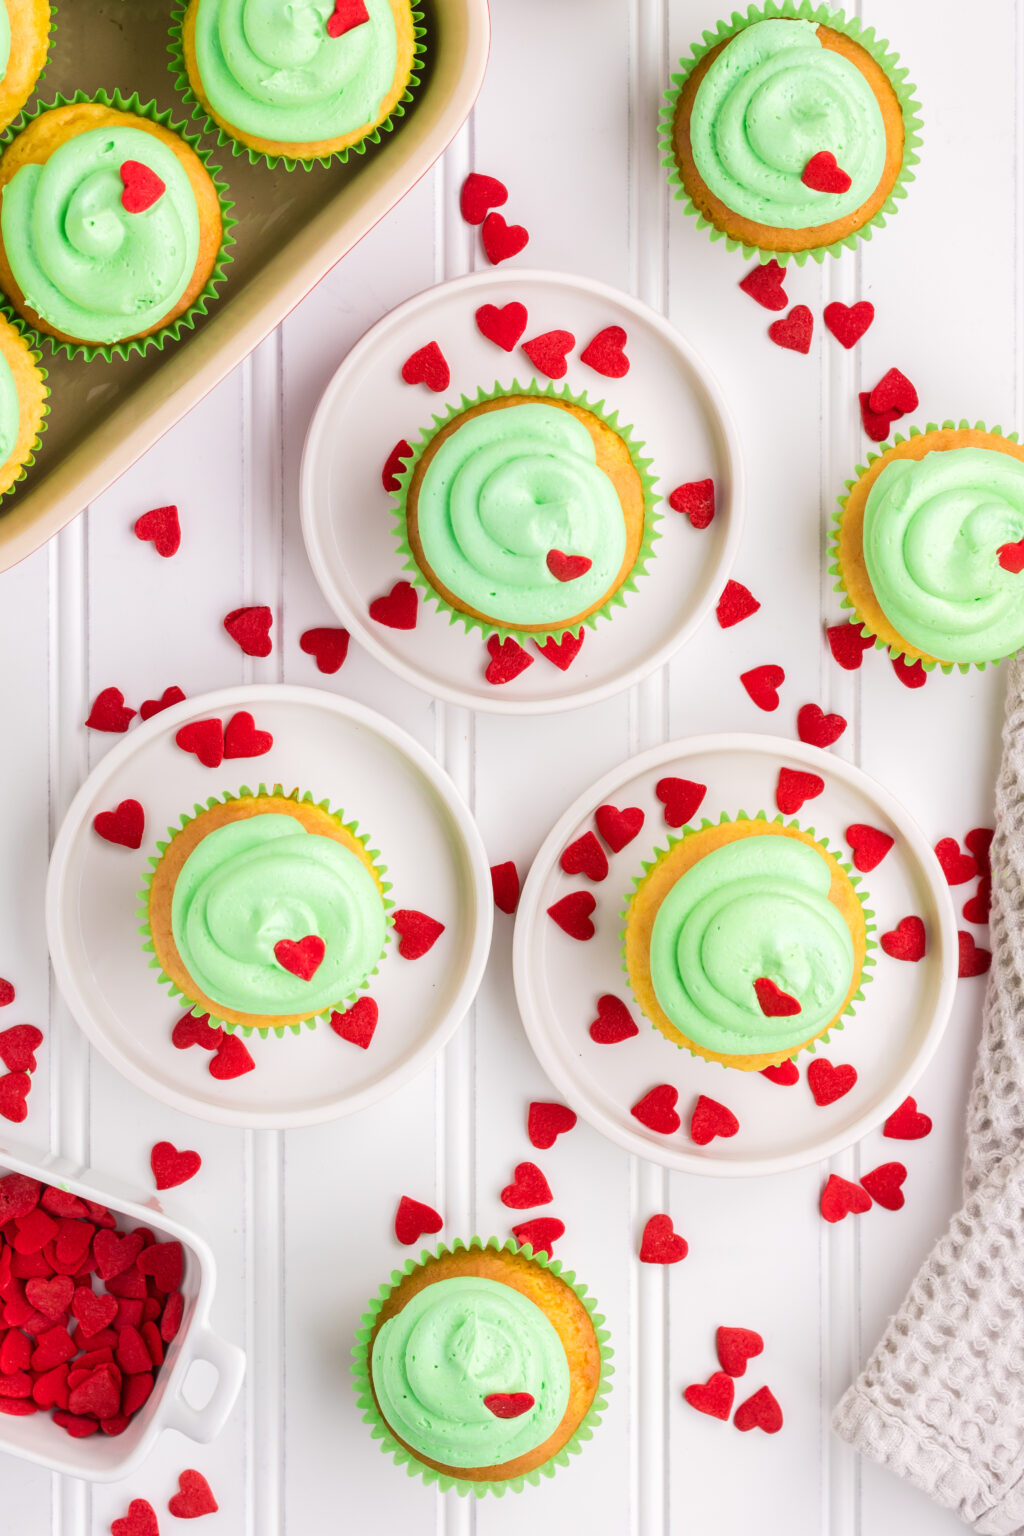 grinch cupcakes on table with white plates and heart sprinkles